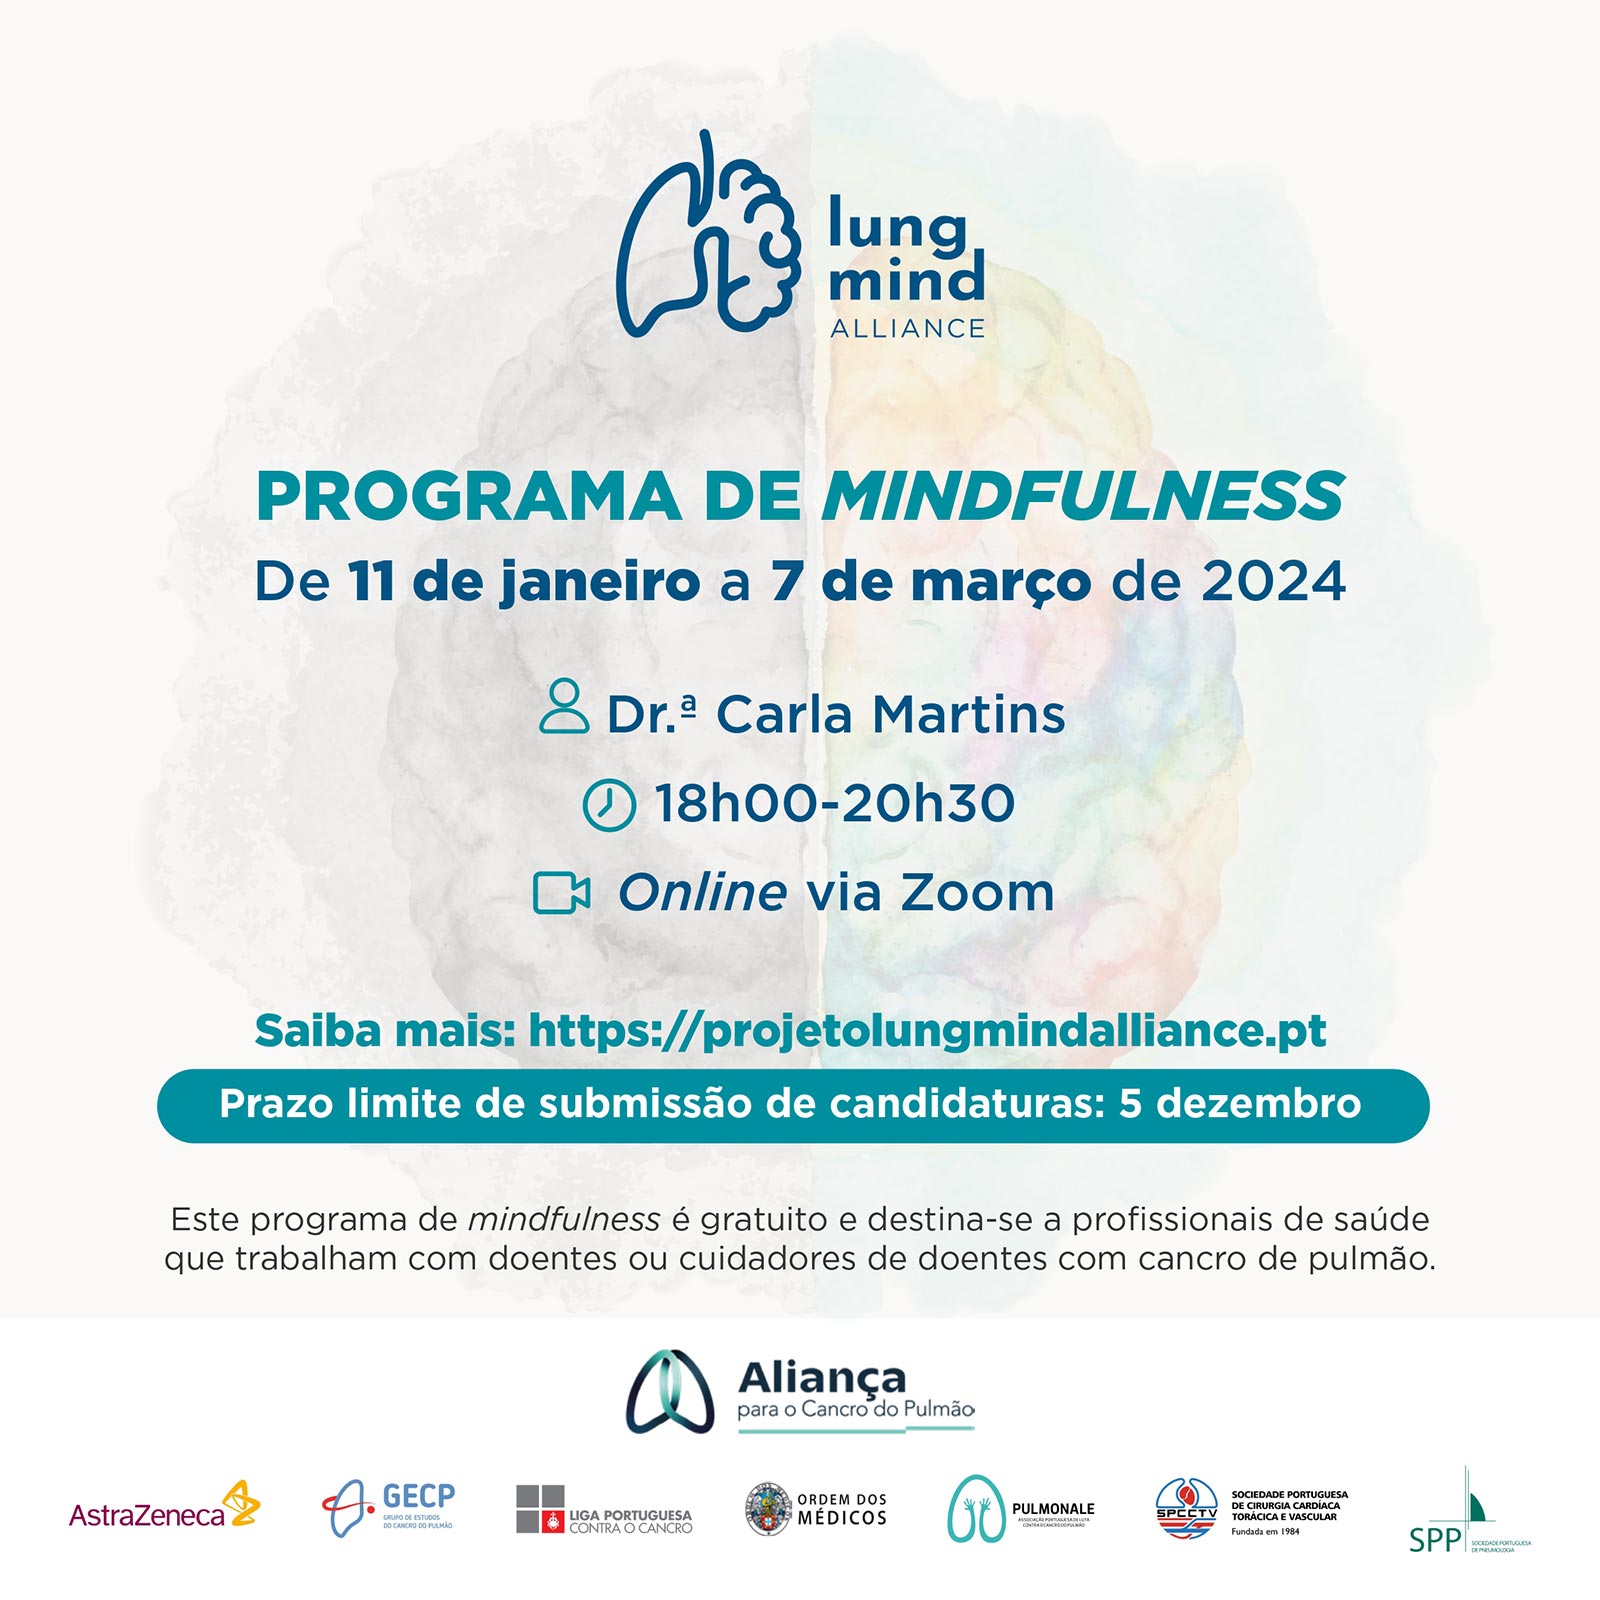 LUNG MIND ALLIANCE PROJECT